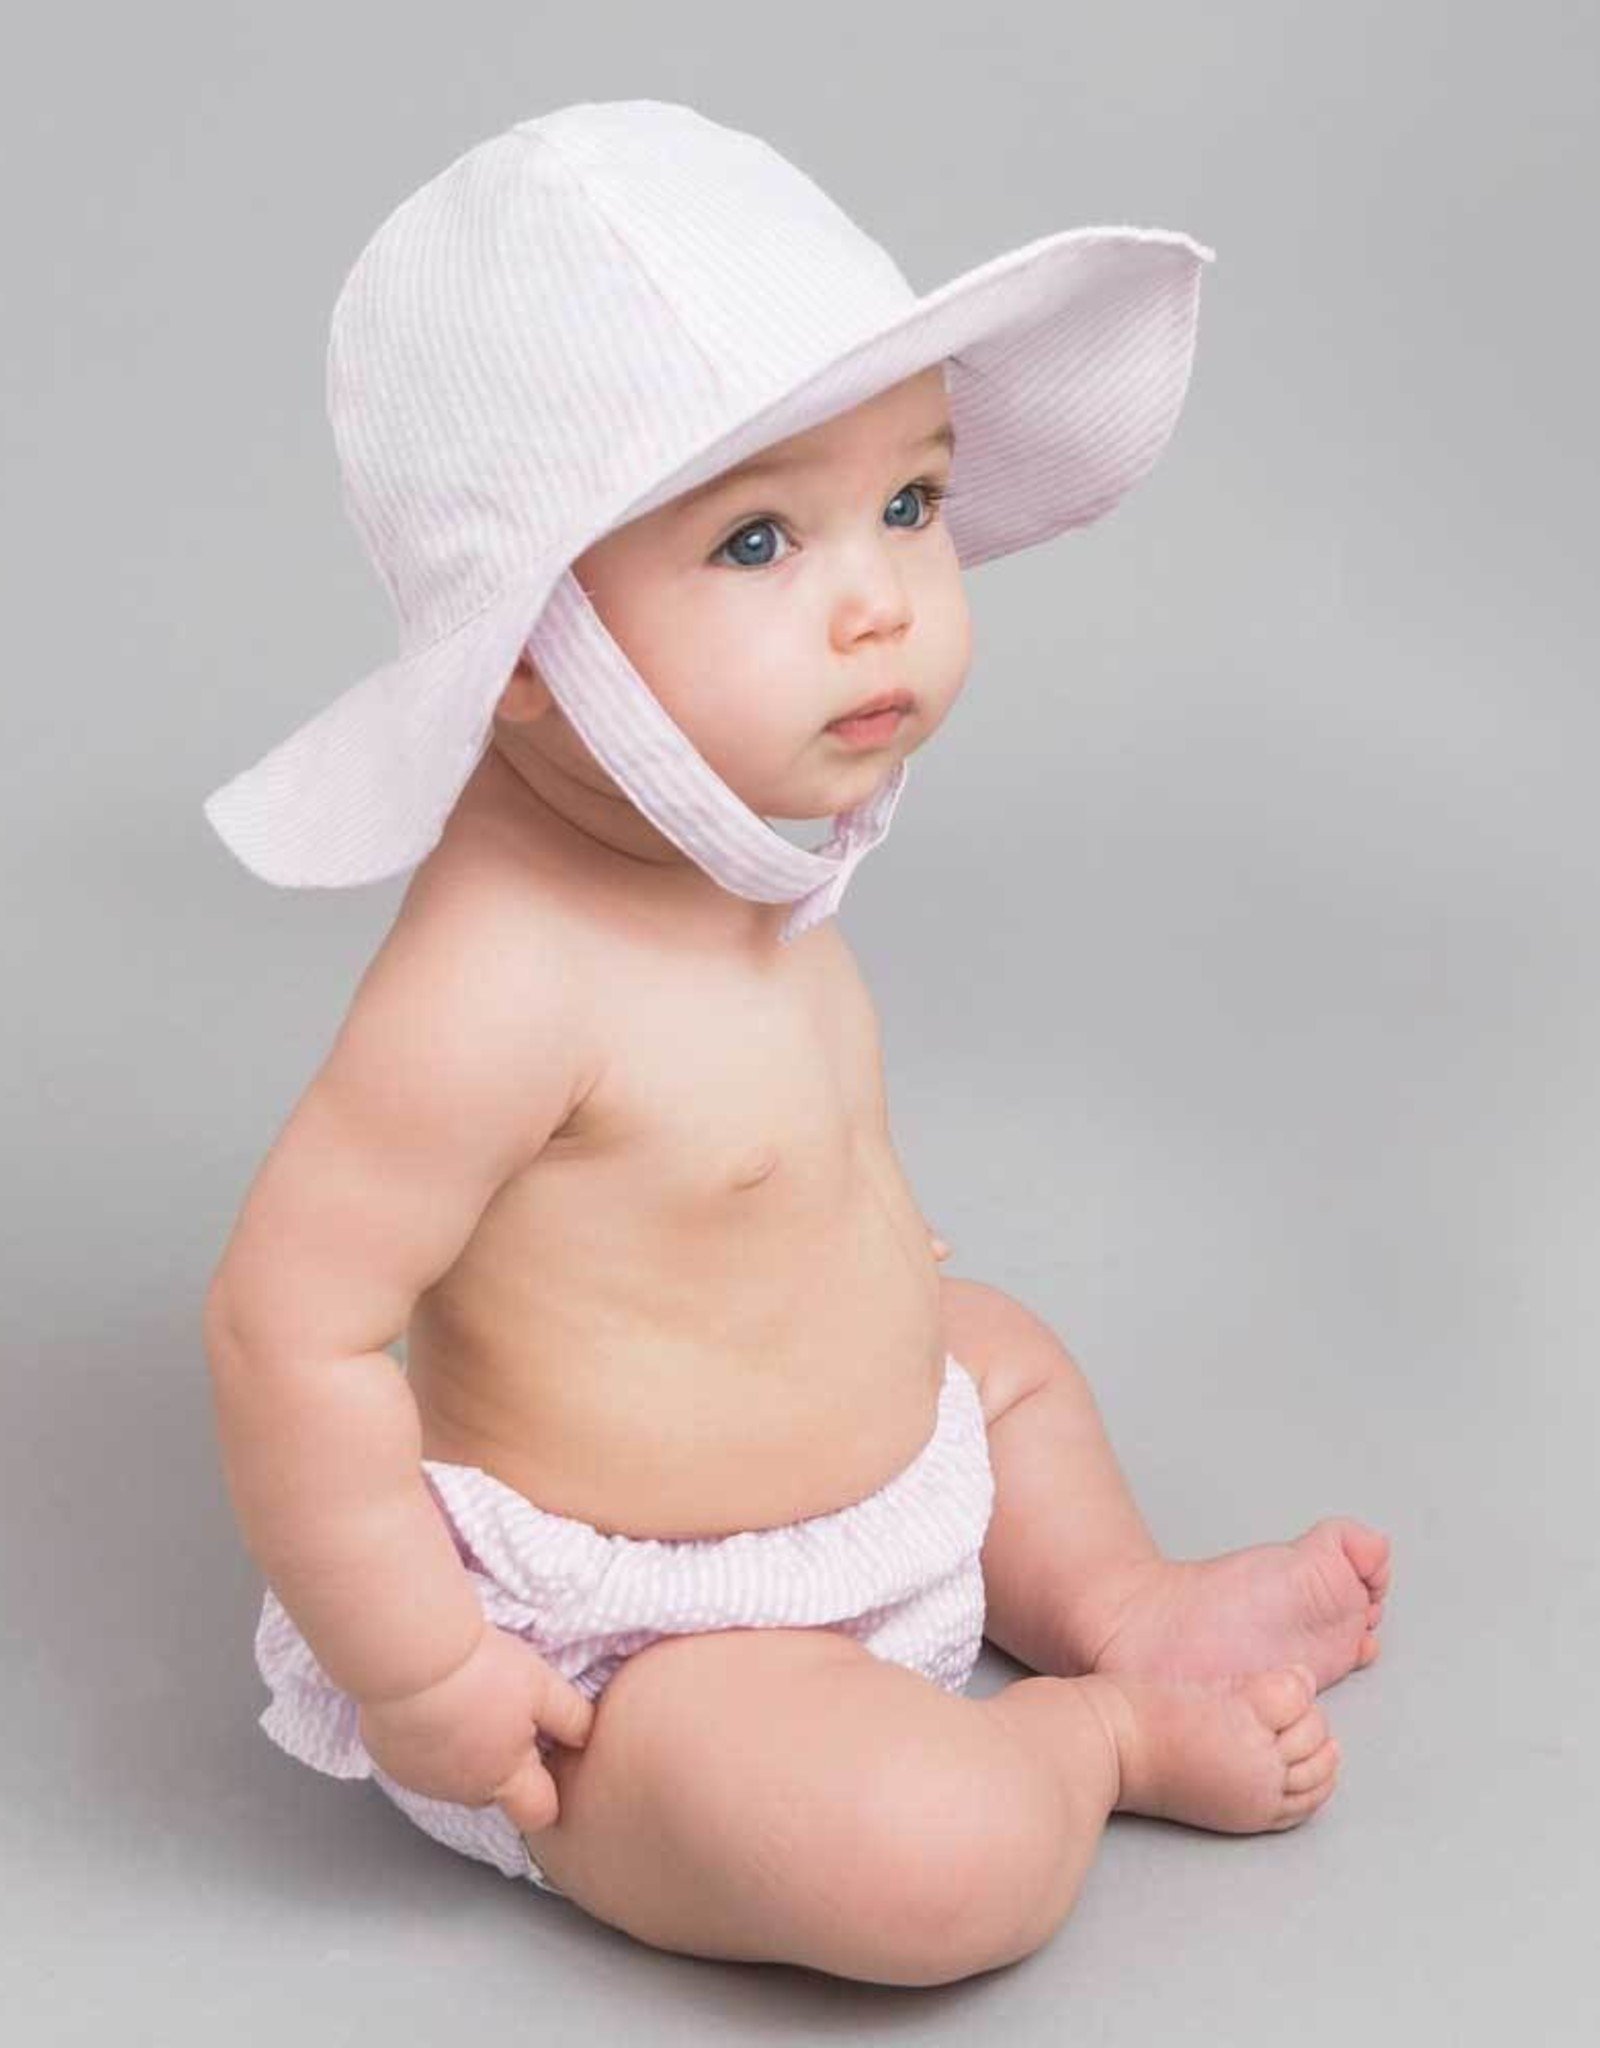 Huggalugs Girls Sunhat - Spoiled Sweet Boutique - Spoiled Sweet Boutique